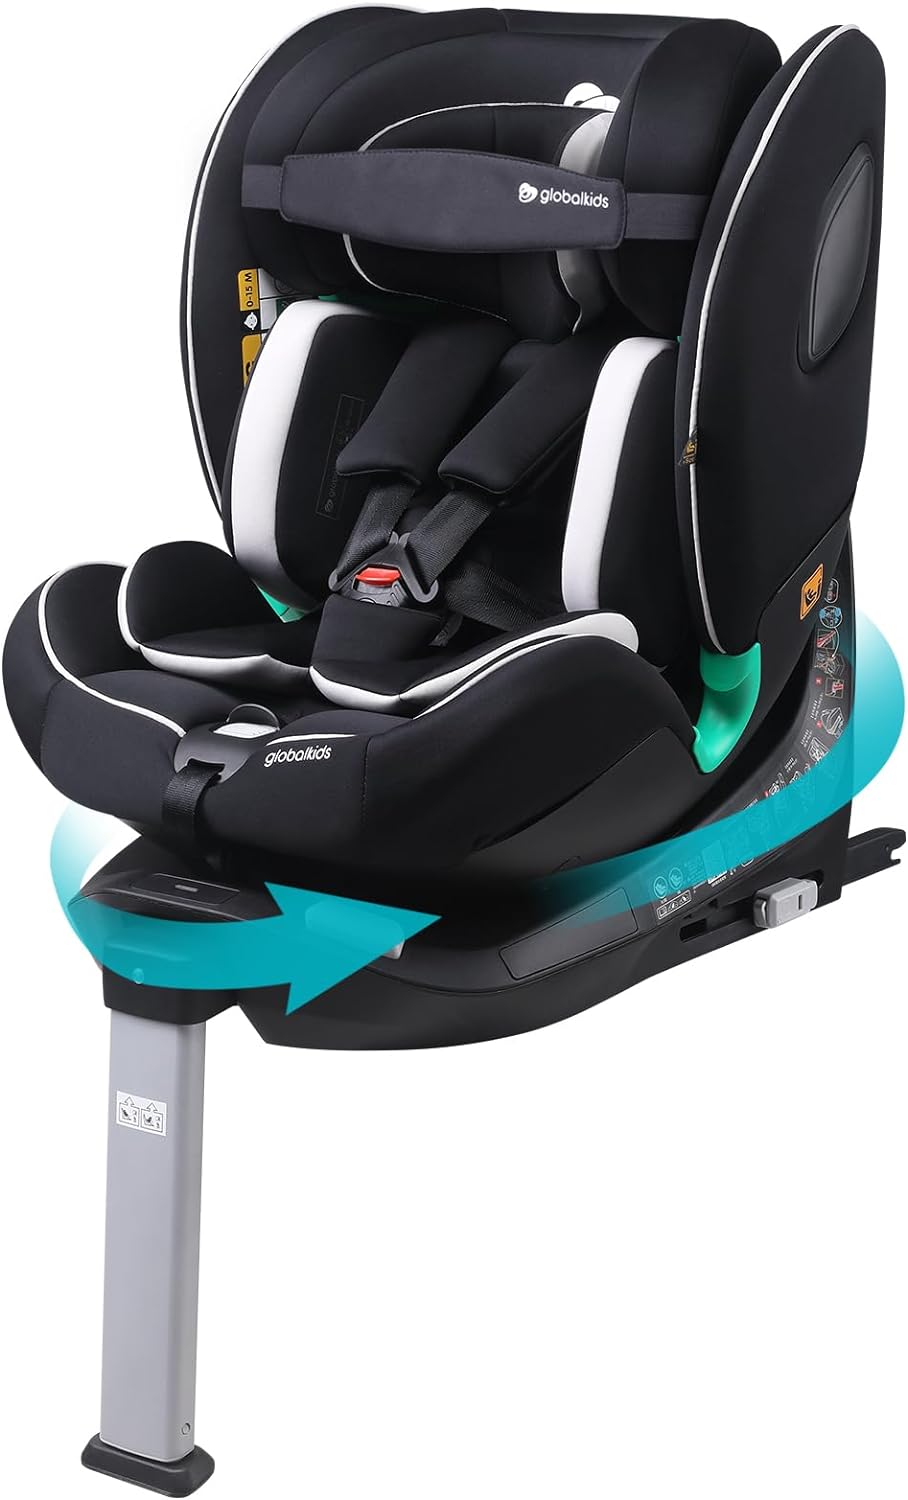 Luxury Gold Revolve360 degree rotation Extend All-in-One Rotational Isofix Car Seat for 0-12 years old ,one car seat for all baby ages